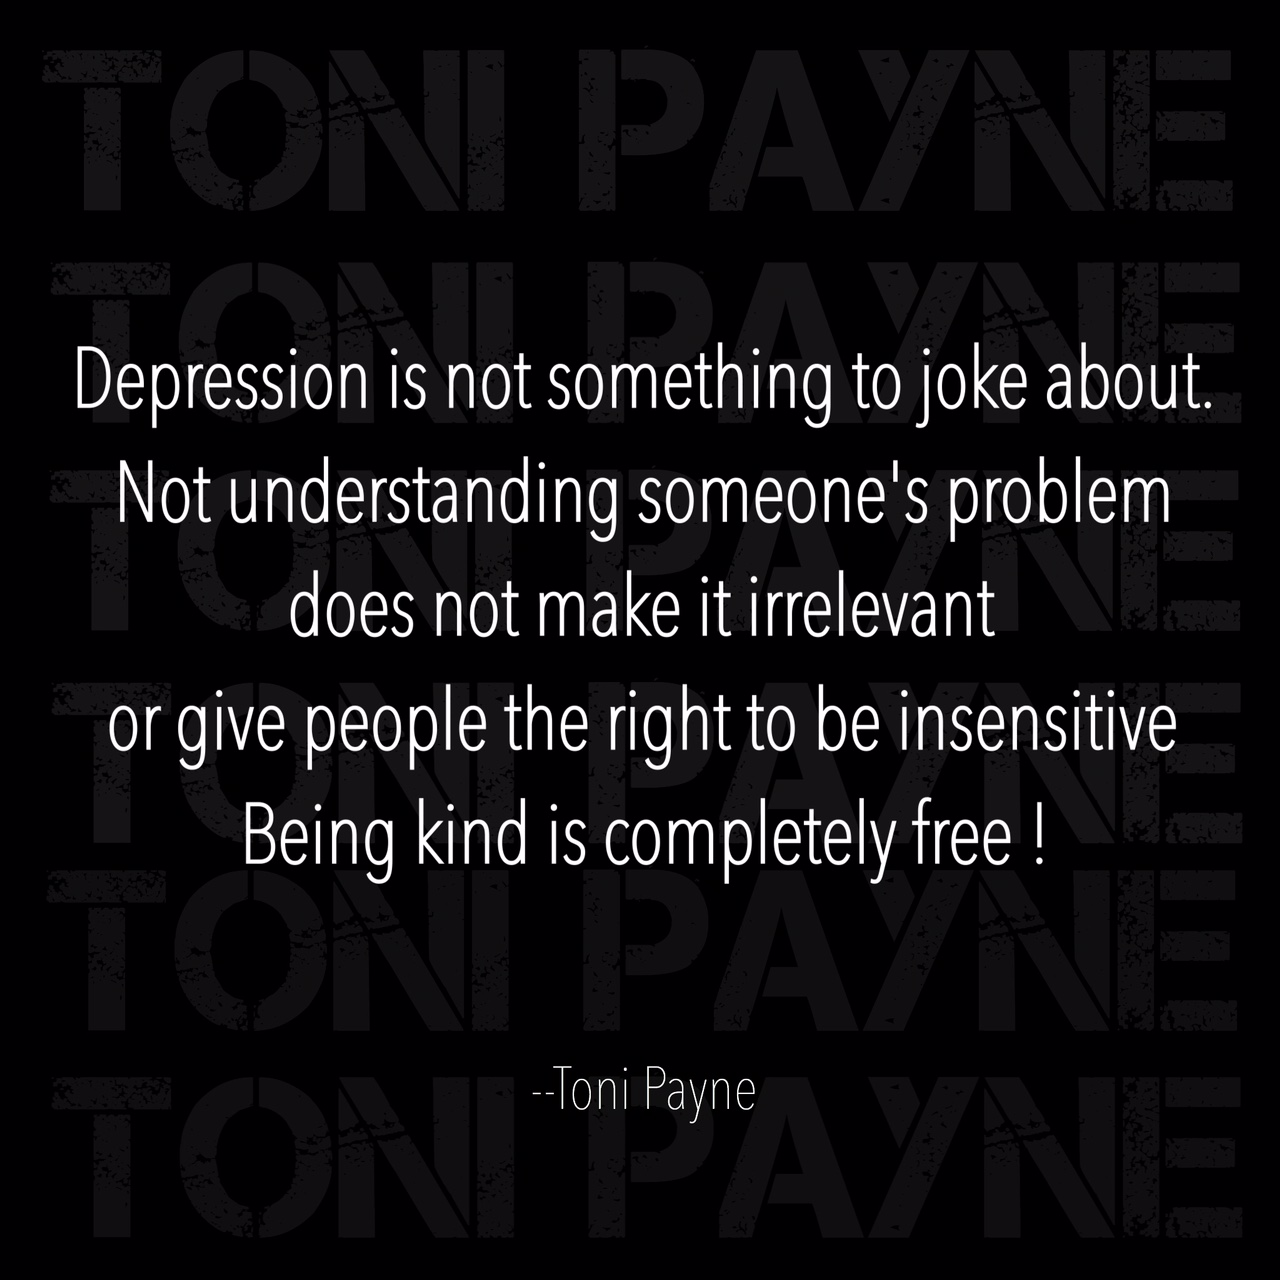 depression quote - depression is not